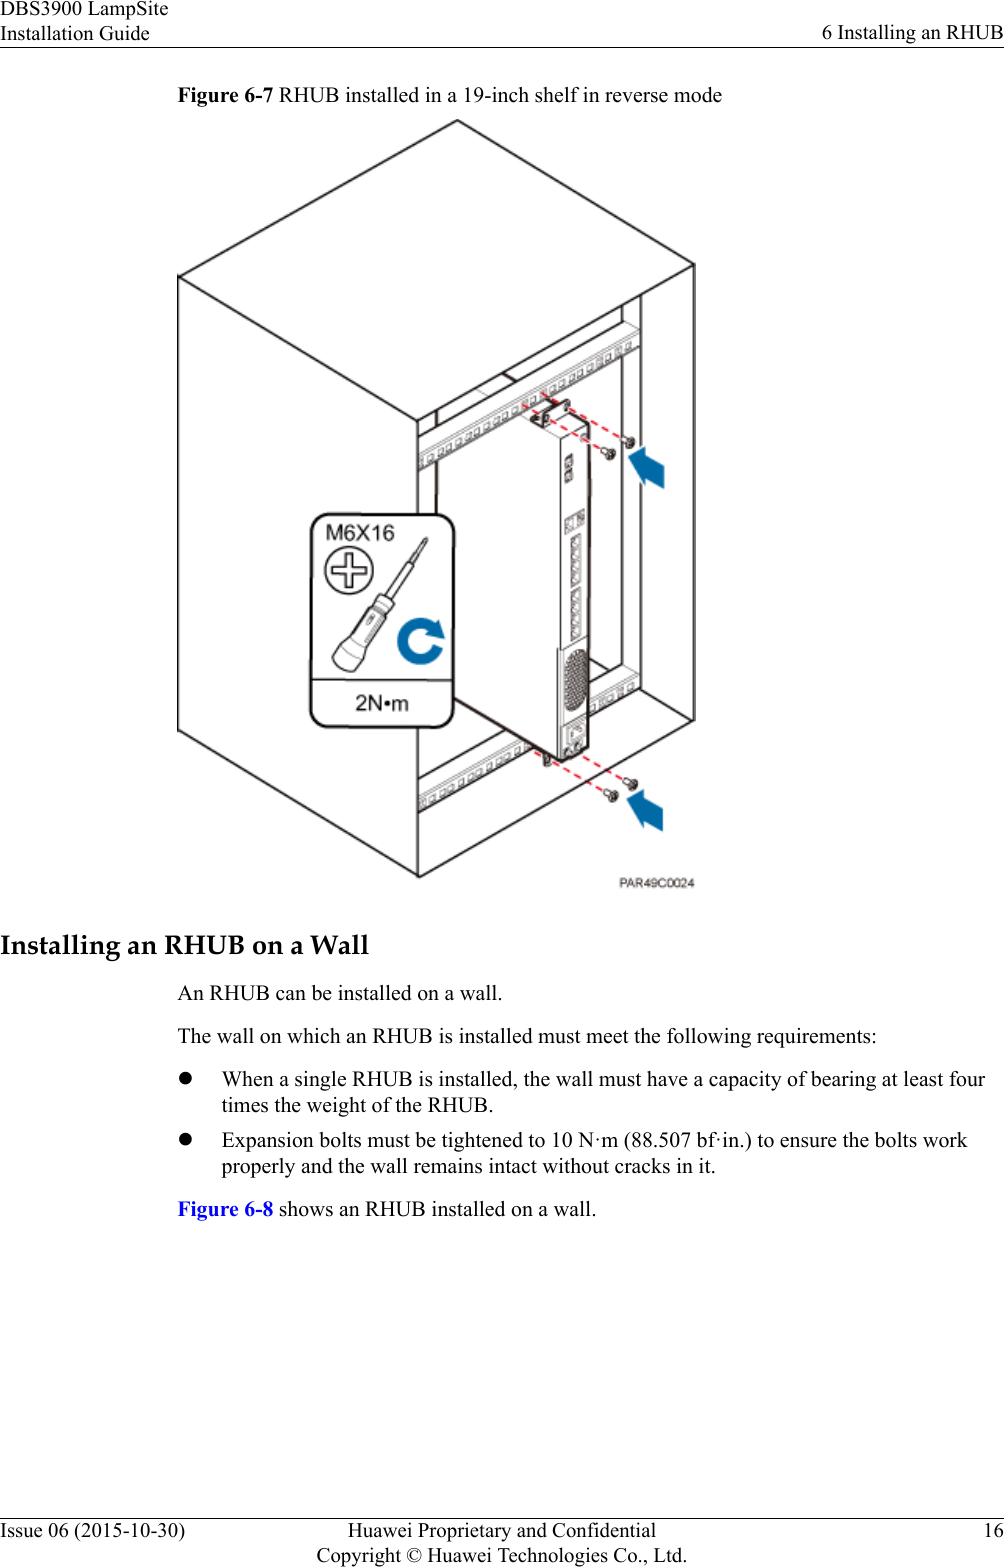 Figure 6-7 RHUB installed in a 19-inch shelf in reverse modeInstalling an RHUB on a WallAn RHUB can be installed on a wall.The wall on which an RHUB is installed must meet the following requirements:lWhen a single RHUB is installed, the wall must have a capacity of bearing at least fourtimes the weight of the RHUB.lExpansion bolts must be tightened to 10 N·m (88.507 bf·in.) to ensure the bolts workproperly and the wall remains intact without cracks in it.Figure 6-8 shows an RHUB installed on a wall.DBS3900 LampSiteInstallation Guide 6 Installing an RHUBIssue 06 (2015-10-30) Huawei Proprietary and ConfidentialCopyright © Huawei Technologies Co., Ltd.16